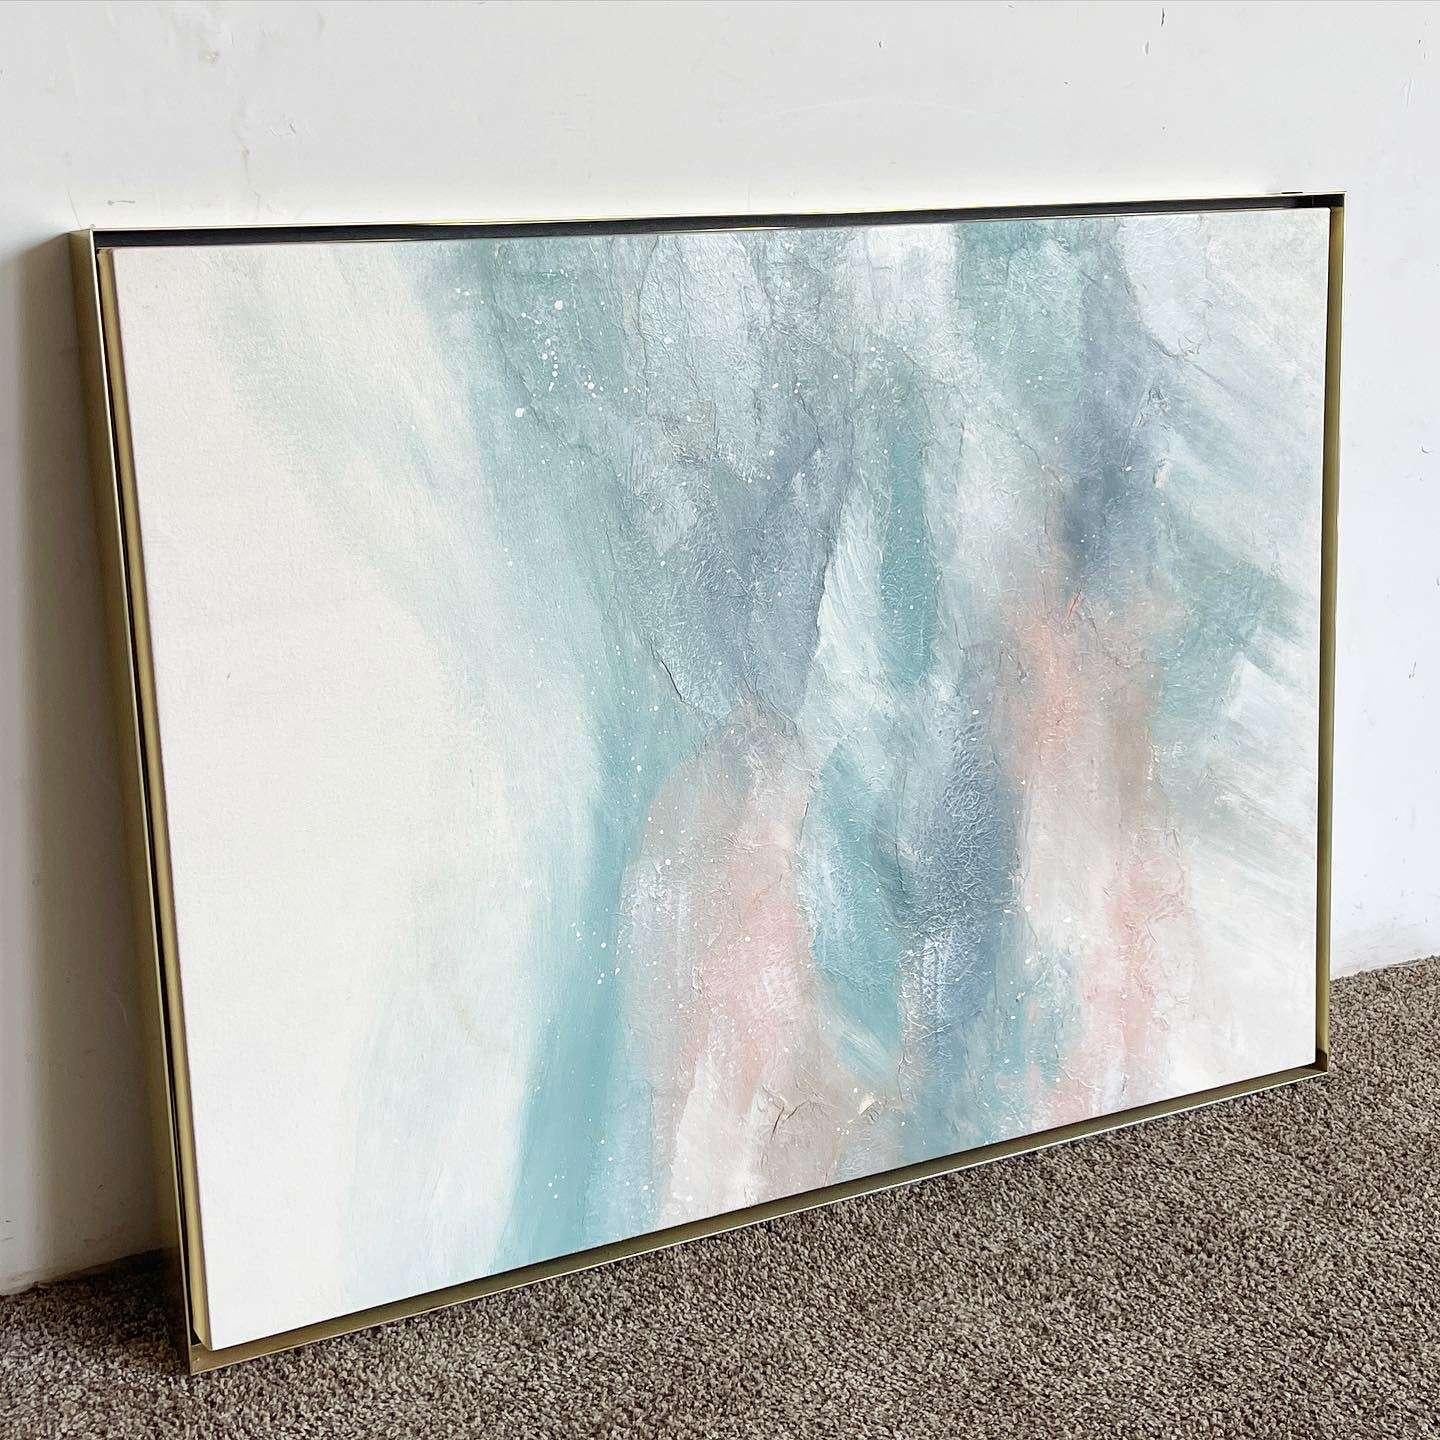 Amazing vintage postmodern abstract oil painting on canvas, a Greg Copeland original. Subject is an abstract blue, green and pink throughout the canvas. Canvas is framed in a think brushed gold frame.